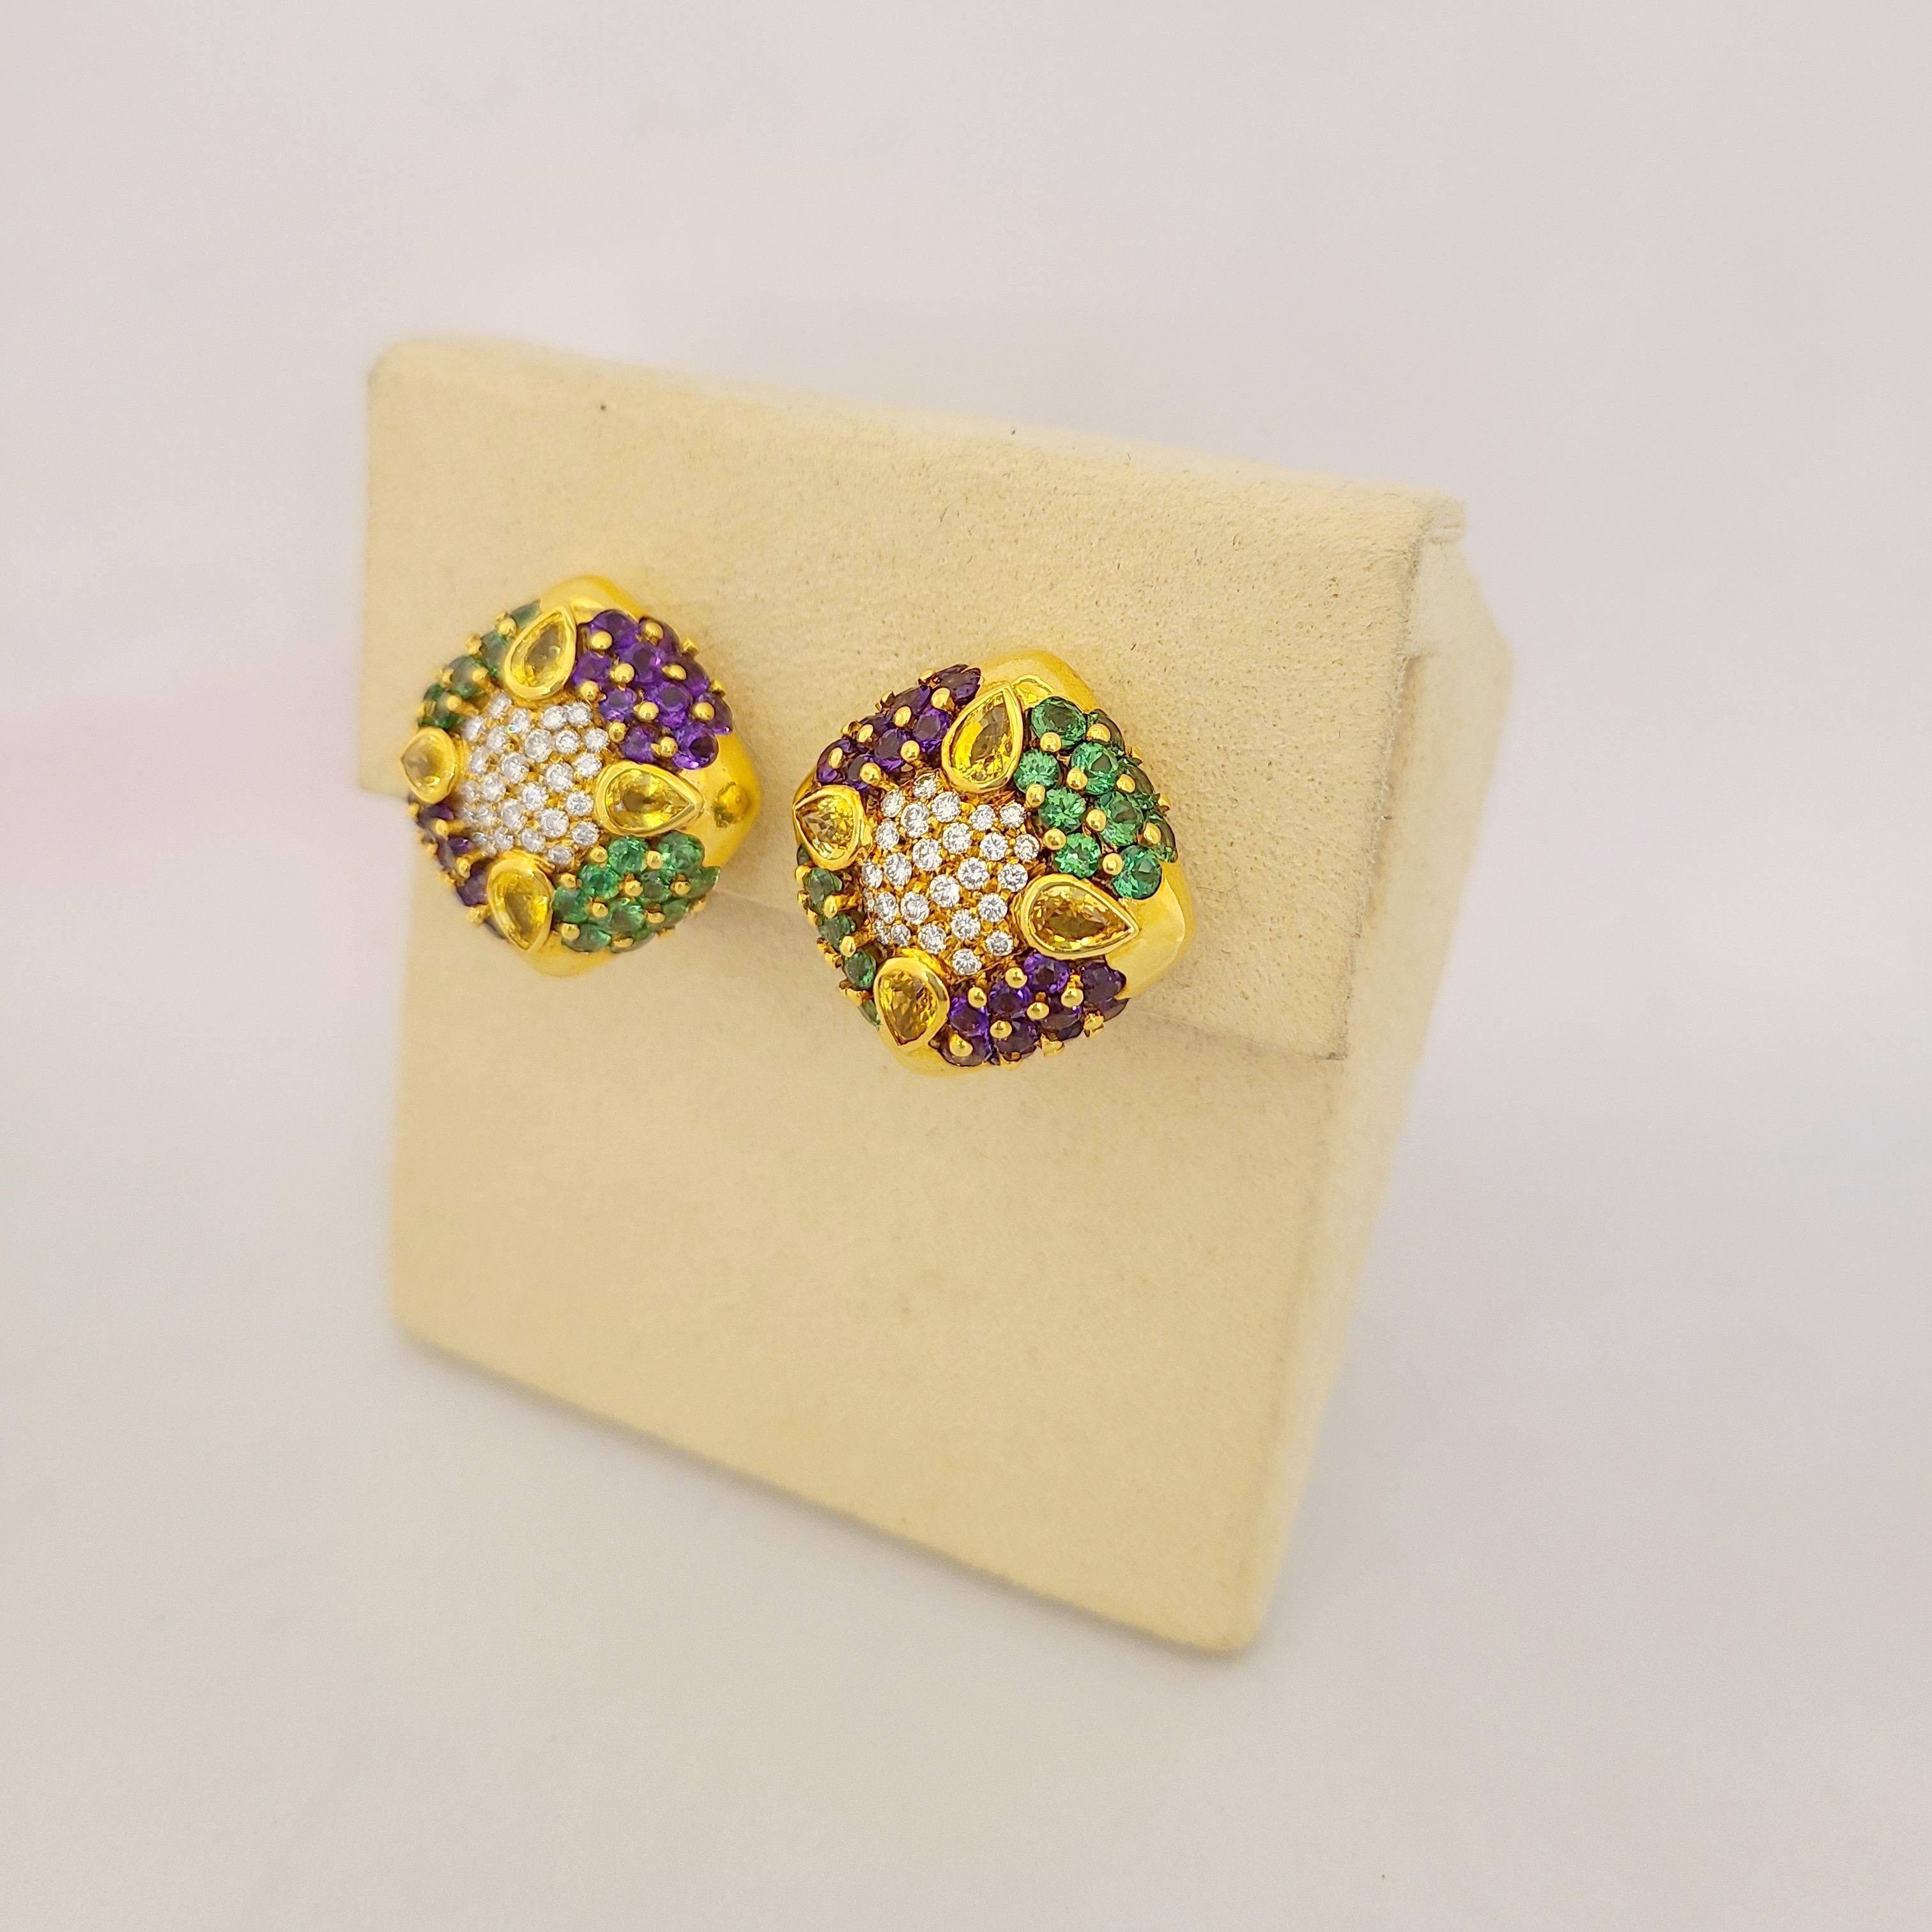 G. verdi of Italy earrings are beautifully crafted in 18 Karat yellow gold, and set with 3.07Ct. of pear shapes yellow sapphires and embellished with amethysts & green tourmaline. The color combination and gem cut variety make for a truly special